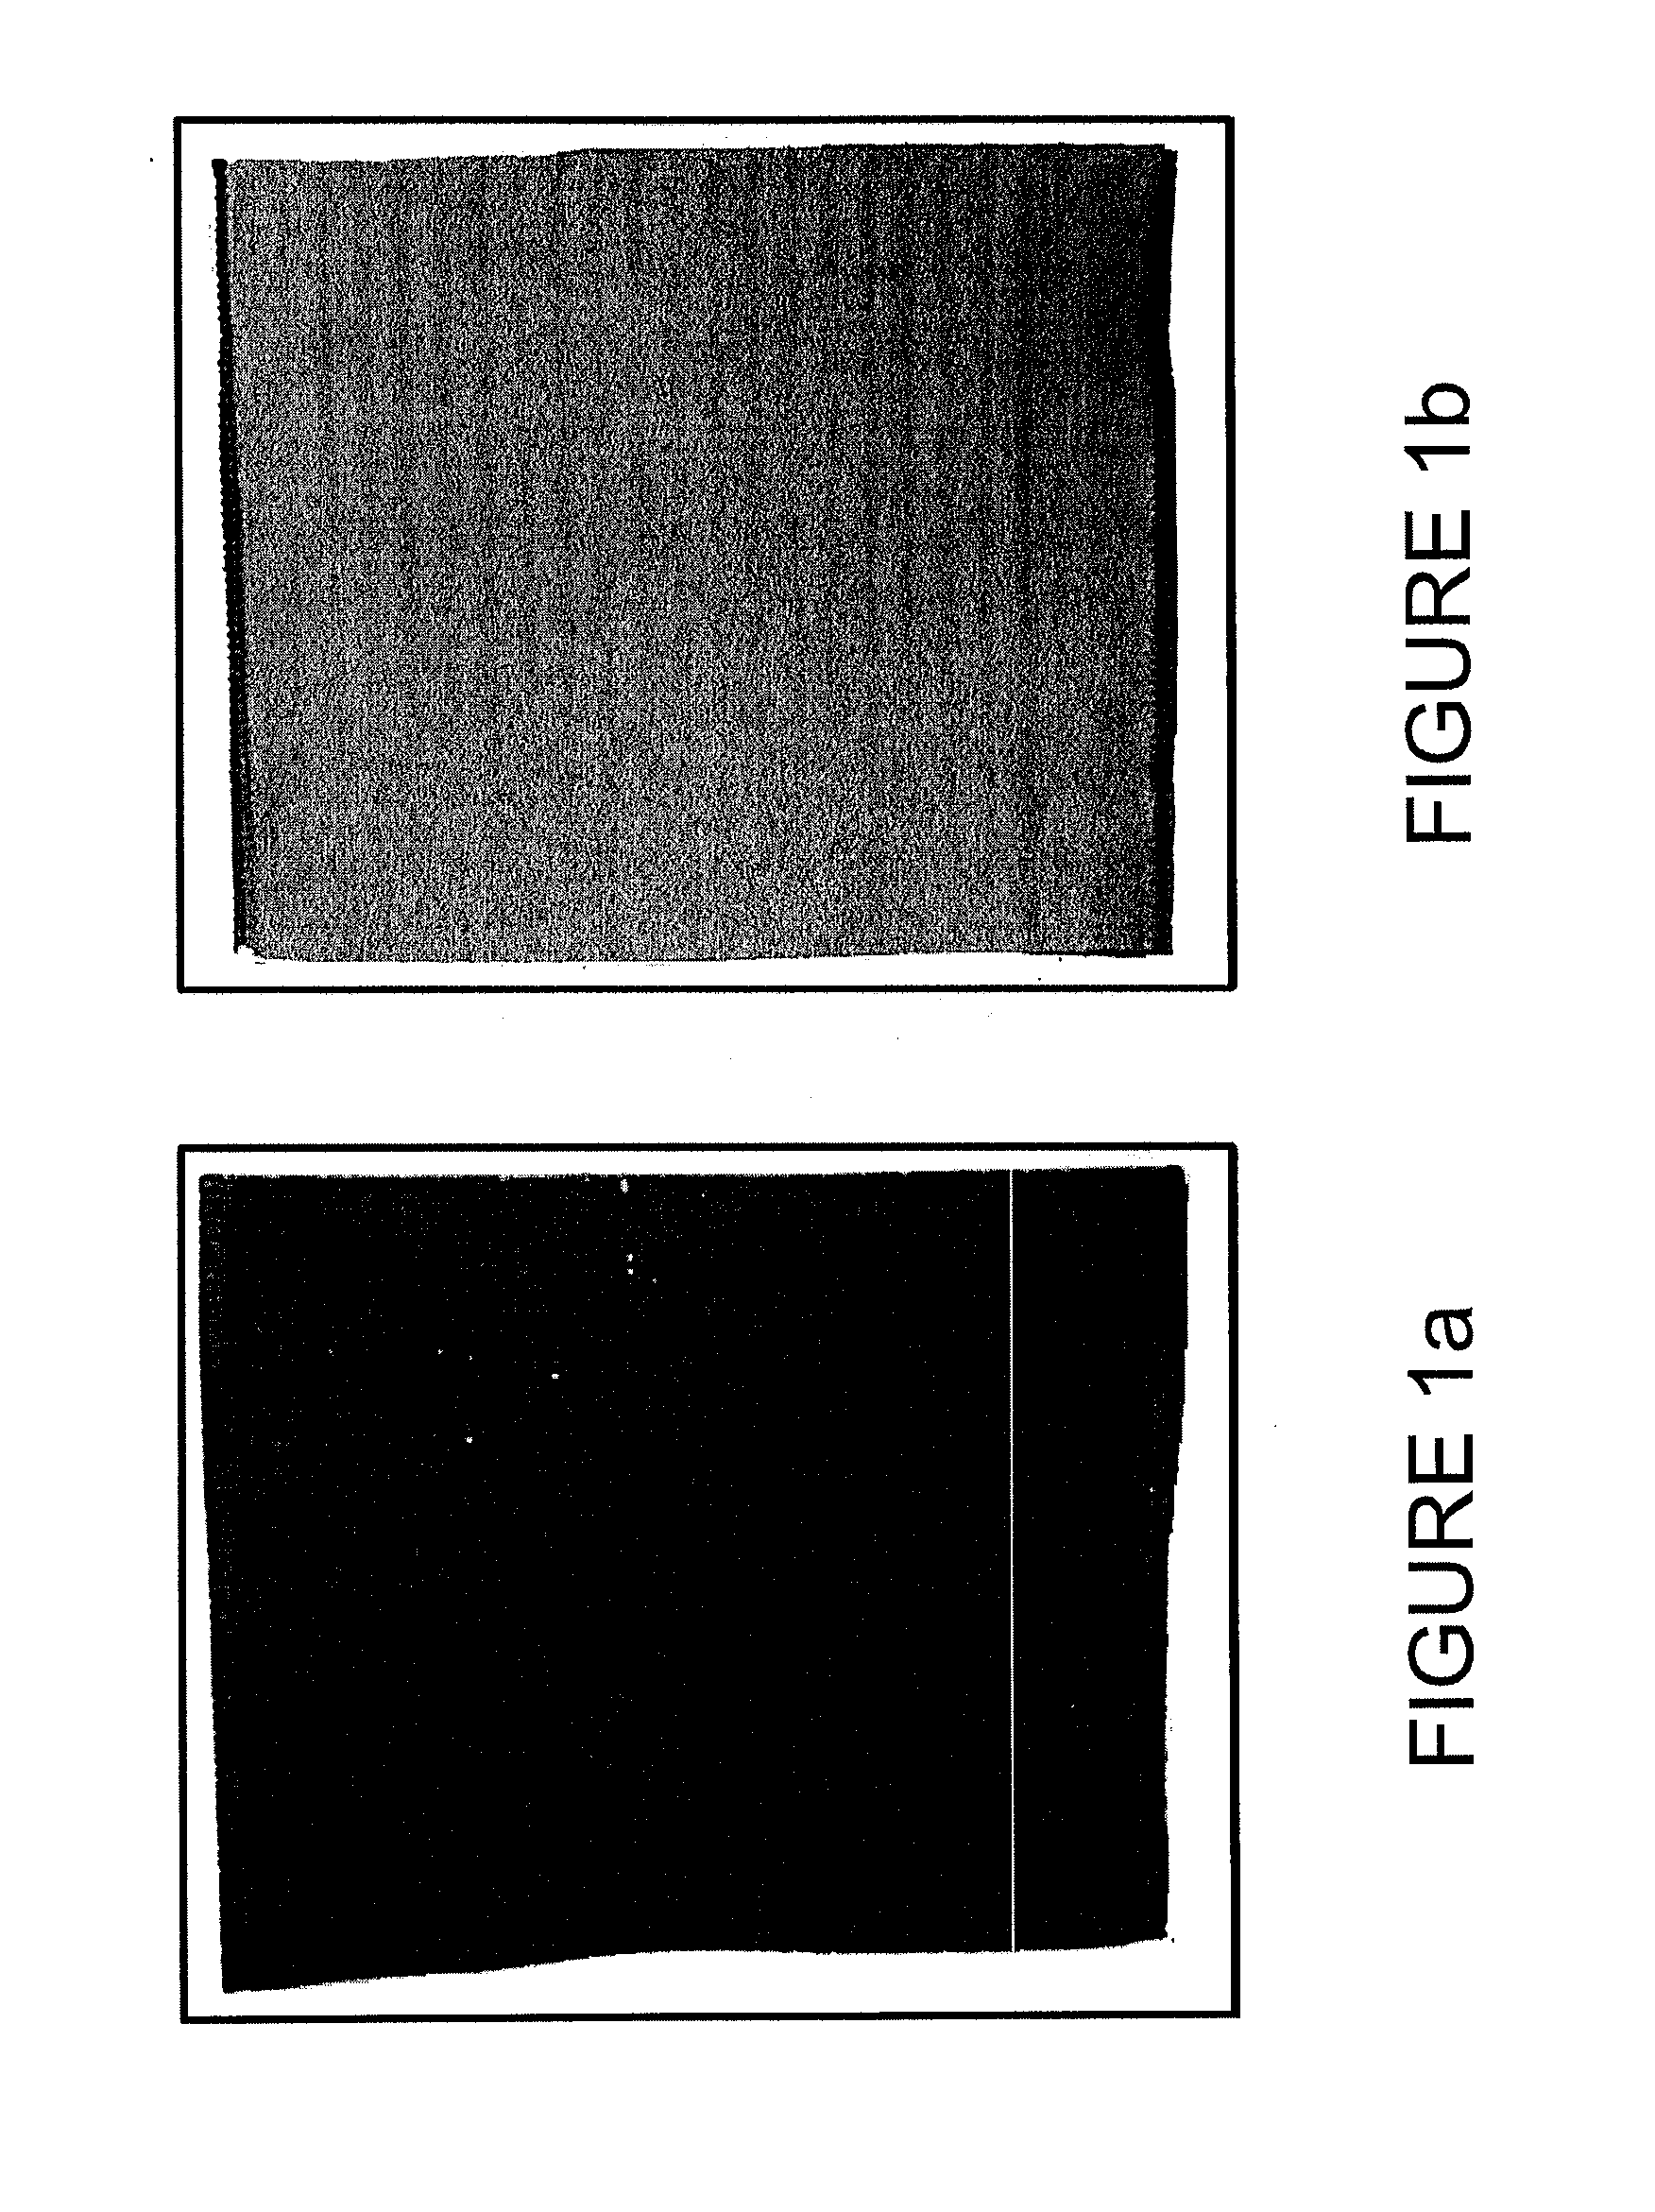 Lead-acid battery separators, electrodes, batteries, and methods of manufacture and use thereof